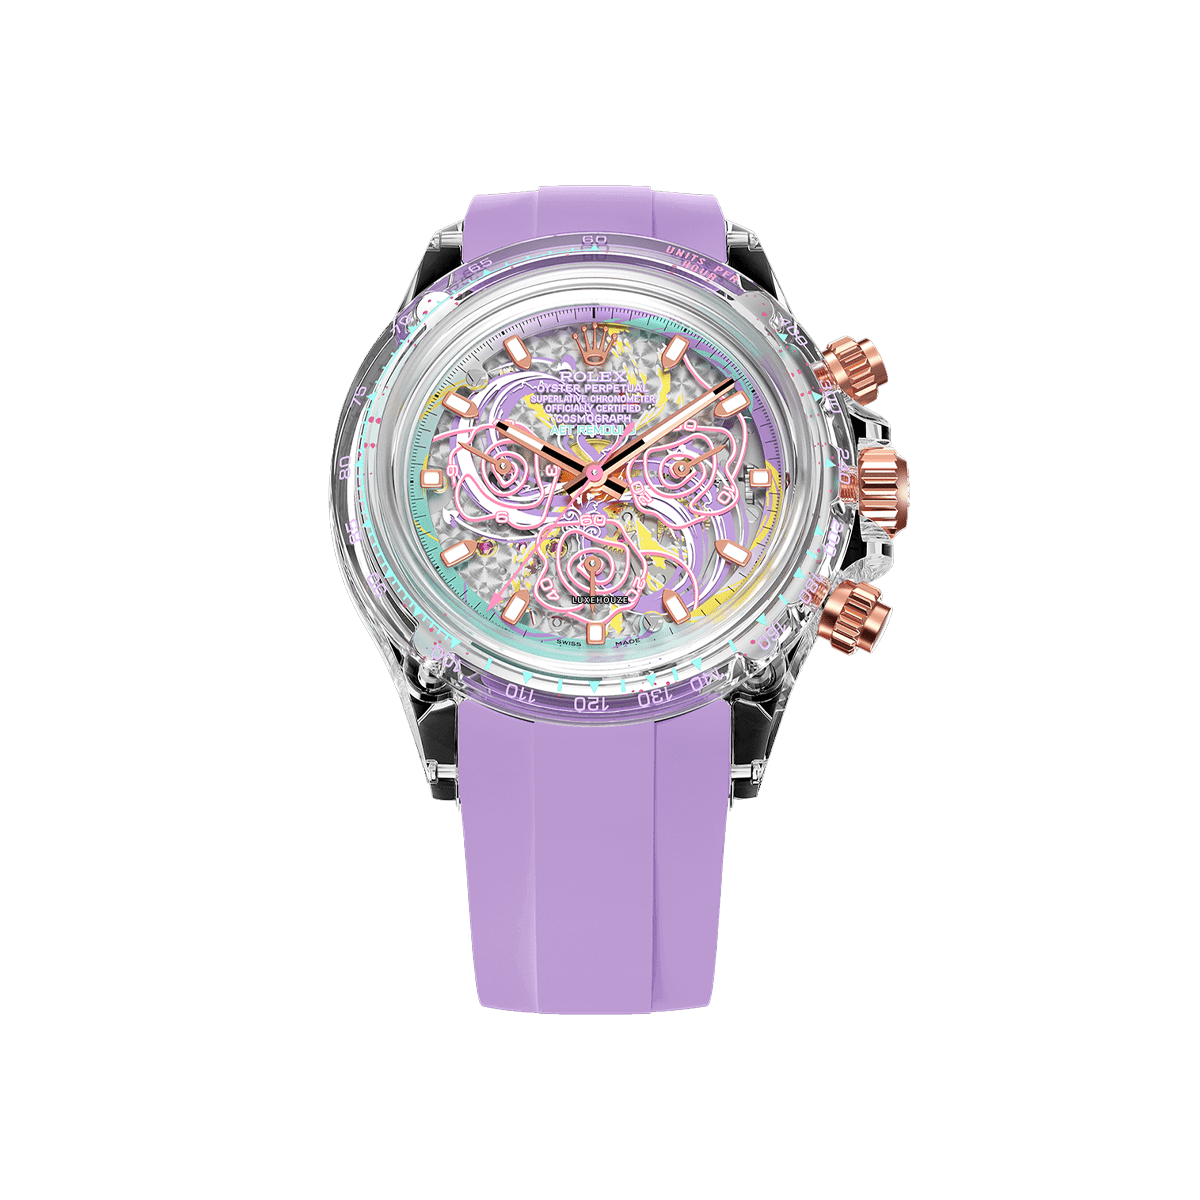 AET Remould Graffiti Collection Daytona - Eros Sapphire Watches AET Remould 